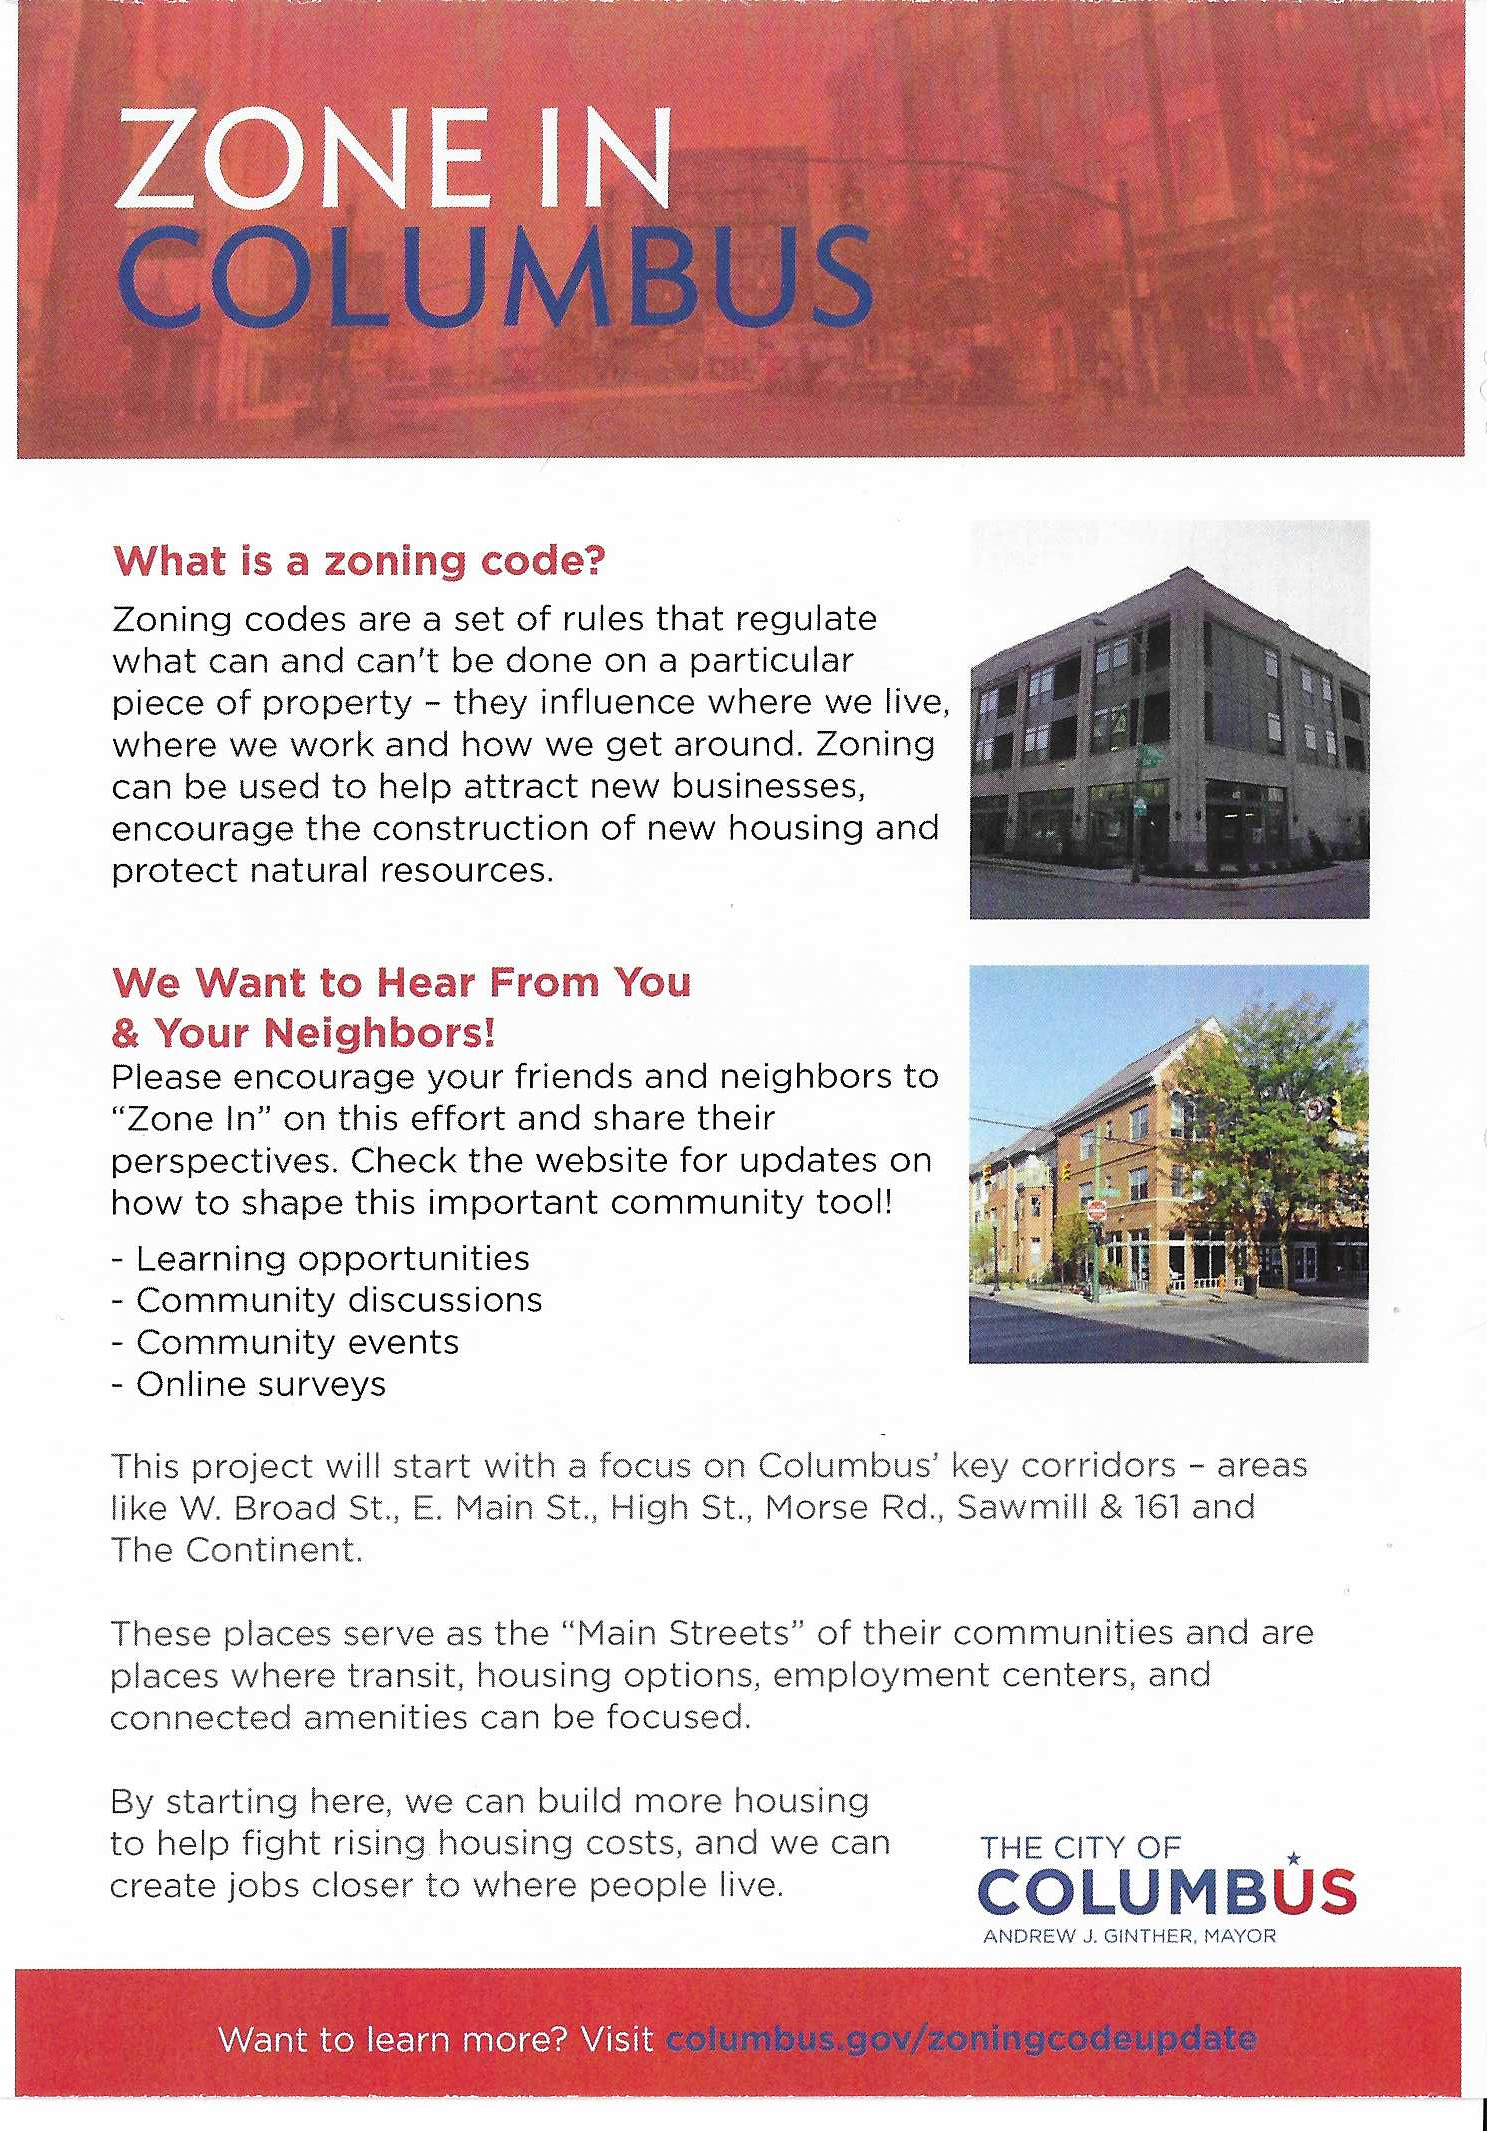 One side of a handout titled 'Zone In Columbus'. It reads: What is a zoning code? Zoning codes are a set of rules that regulate what can and can't be done on a particular piece of property - they influence where we live, where we work, and how we get around. Zoning can be used to help attract new businesses, encourage the construction of new housing and protect natural resources. We want to hear from you and your neighbors! Please encourage your friends and neighbors to 'zone in' on this effort and share their perspectives. Check the website for updates on how to shape this important community tool! Learning opportunities, community discussions, community events, online surveys. This project will start with a focus on Columbus' key corridors - areas like W. Broad St., E. Main St., High St., Morse Rd., Sawmill & 161 and The Continent. These places serve as the 'Main Streets' of their communities and are places where transit, housing options, employment centers, and connected amenities can be focused. By starting here, we can build more housing to help fight rising housing costs, and we can create jobs closer to where people live. Want to learn more? Visit columbus.gov/zoningcodeupdate